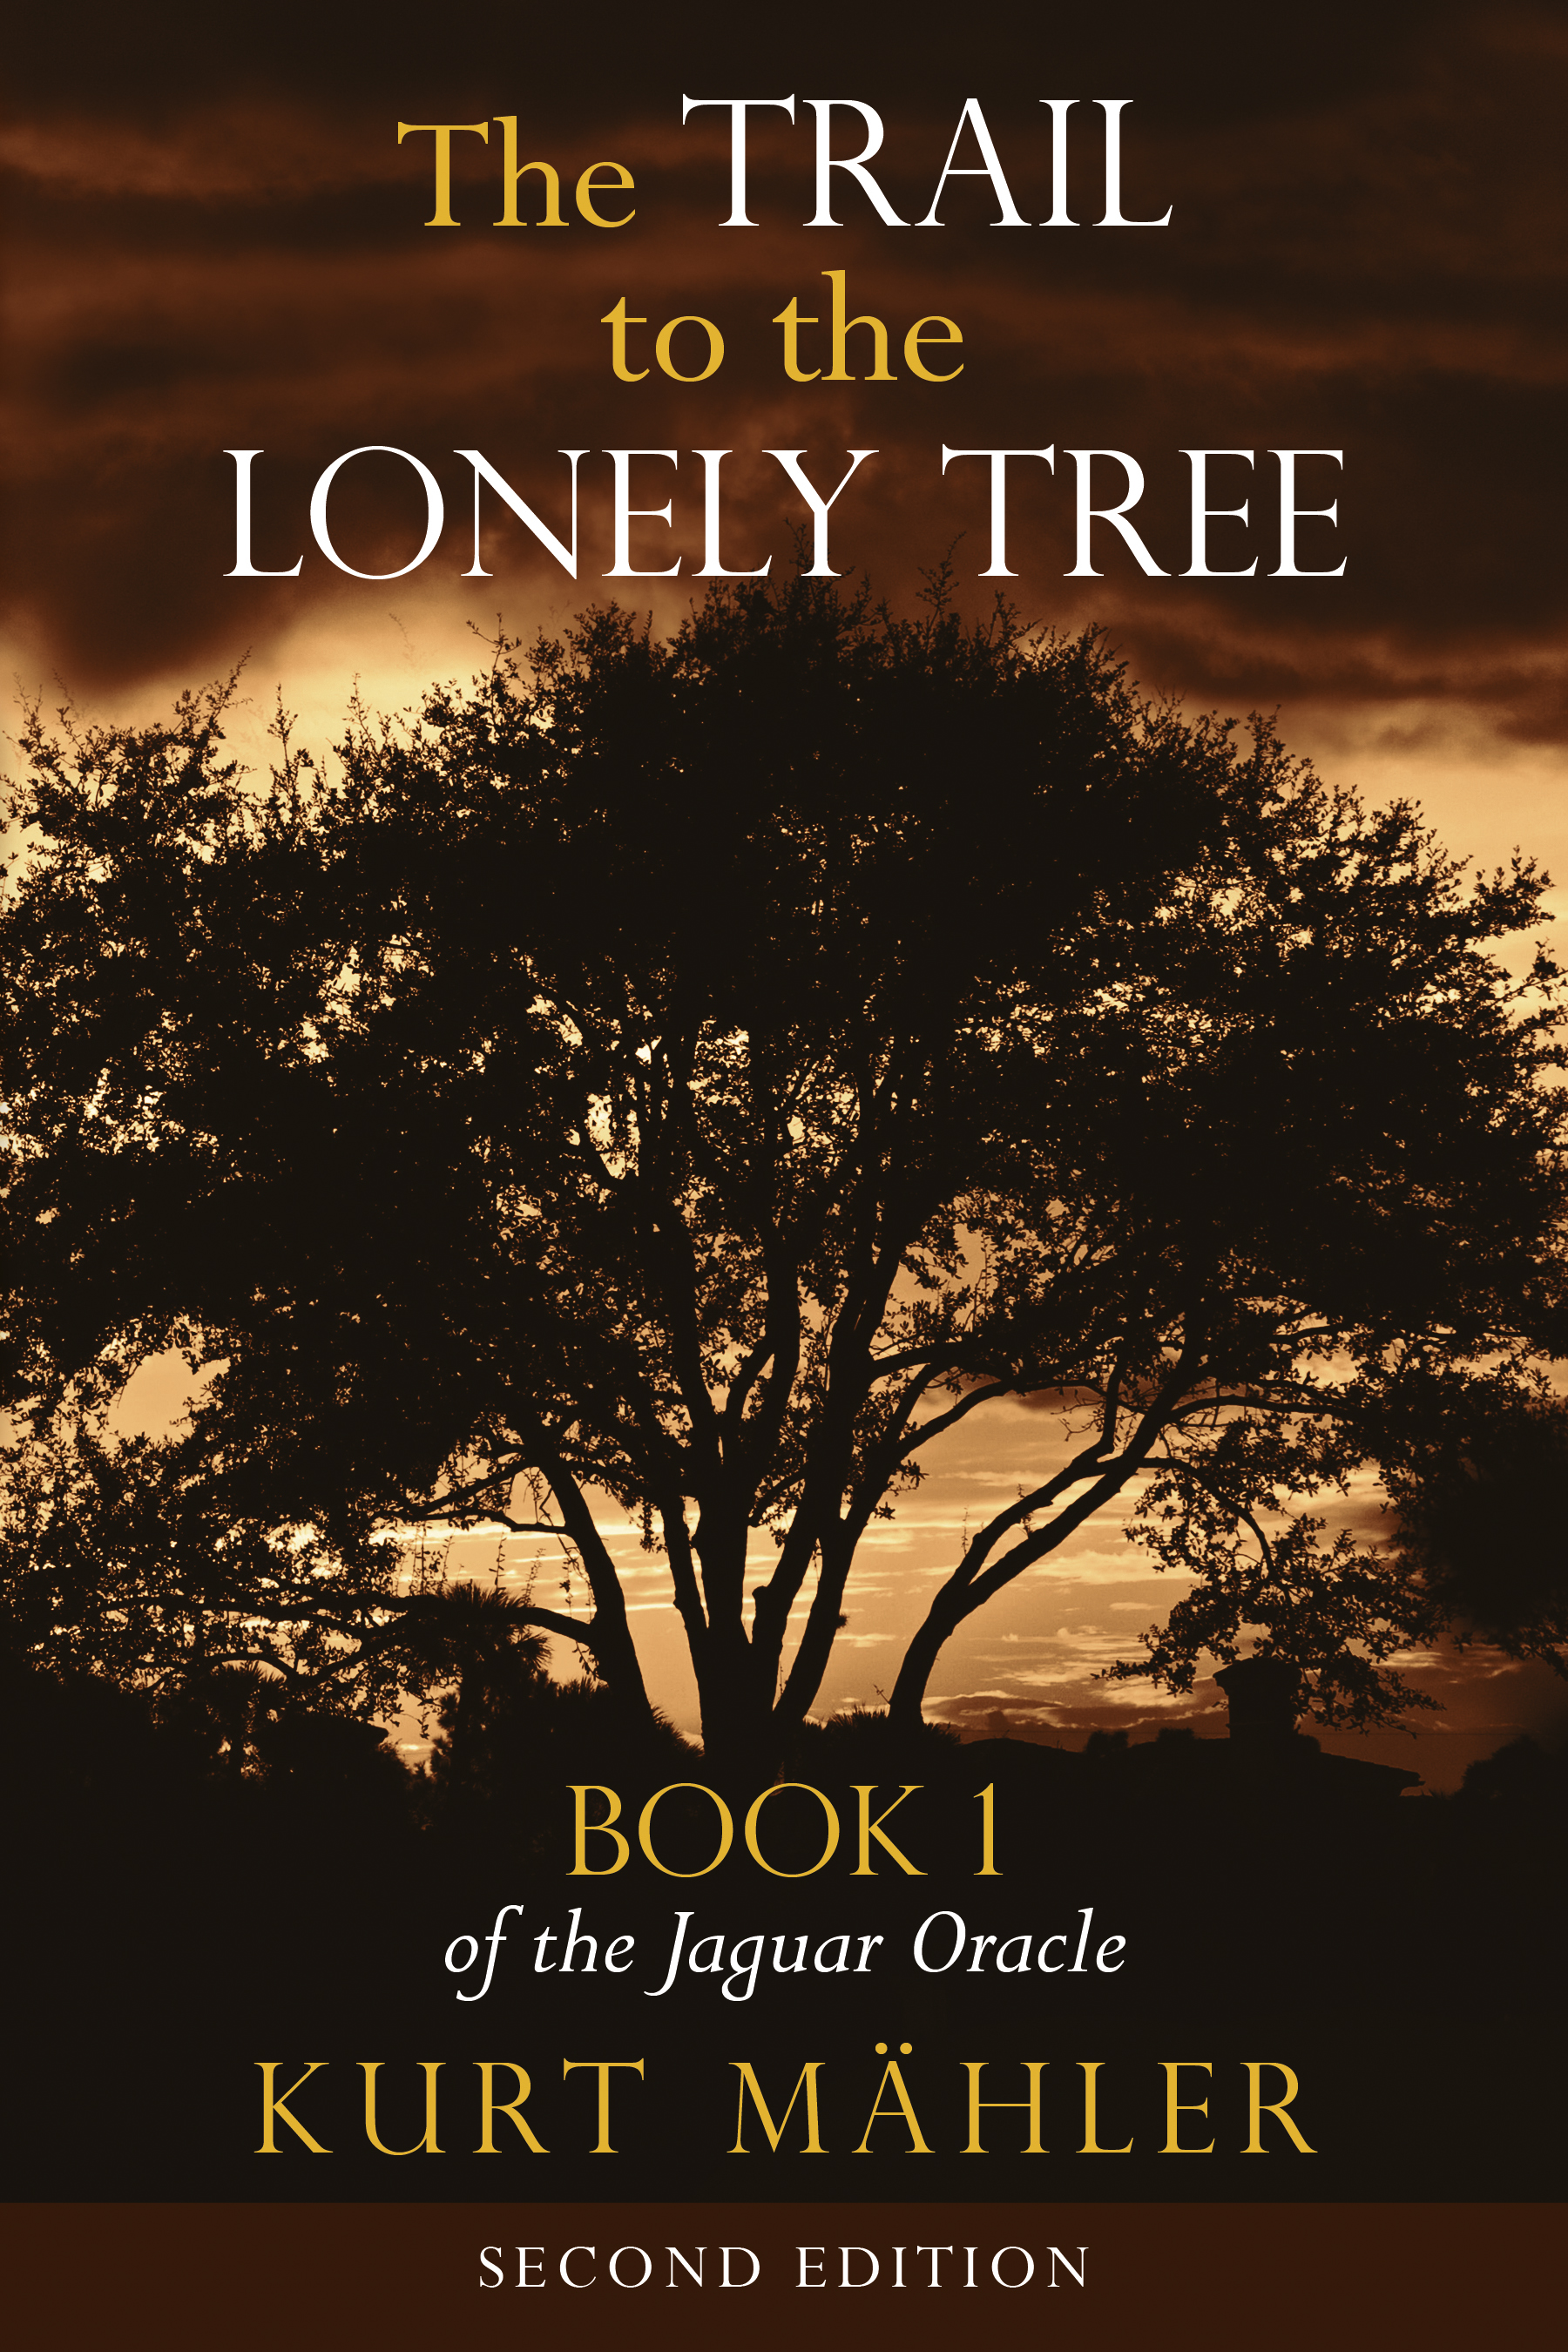 The Trail to the Lonely Tree (The Jaguar Oracle Book 1)